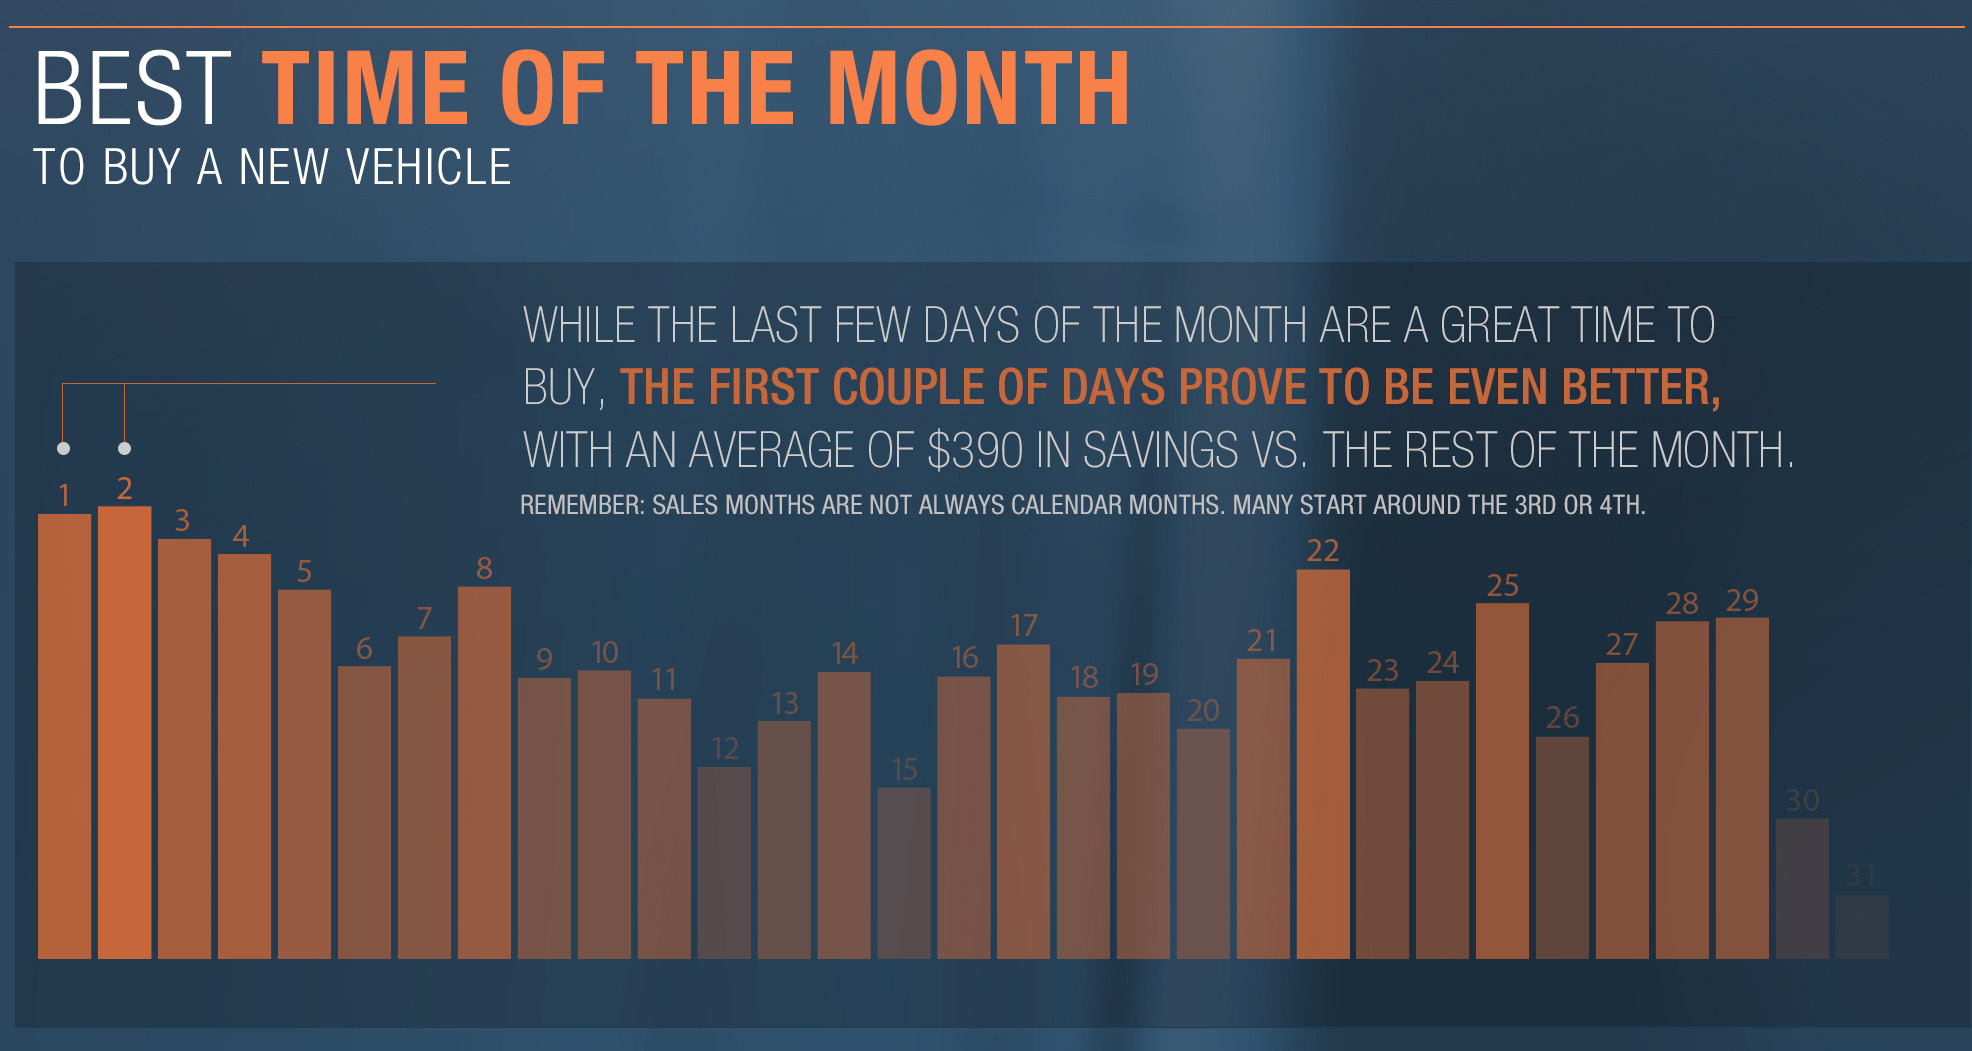 august-is-the-best-month-to-buy-a-new-car-according-to-truecar